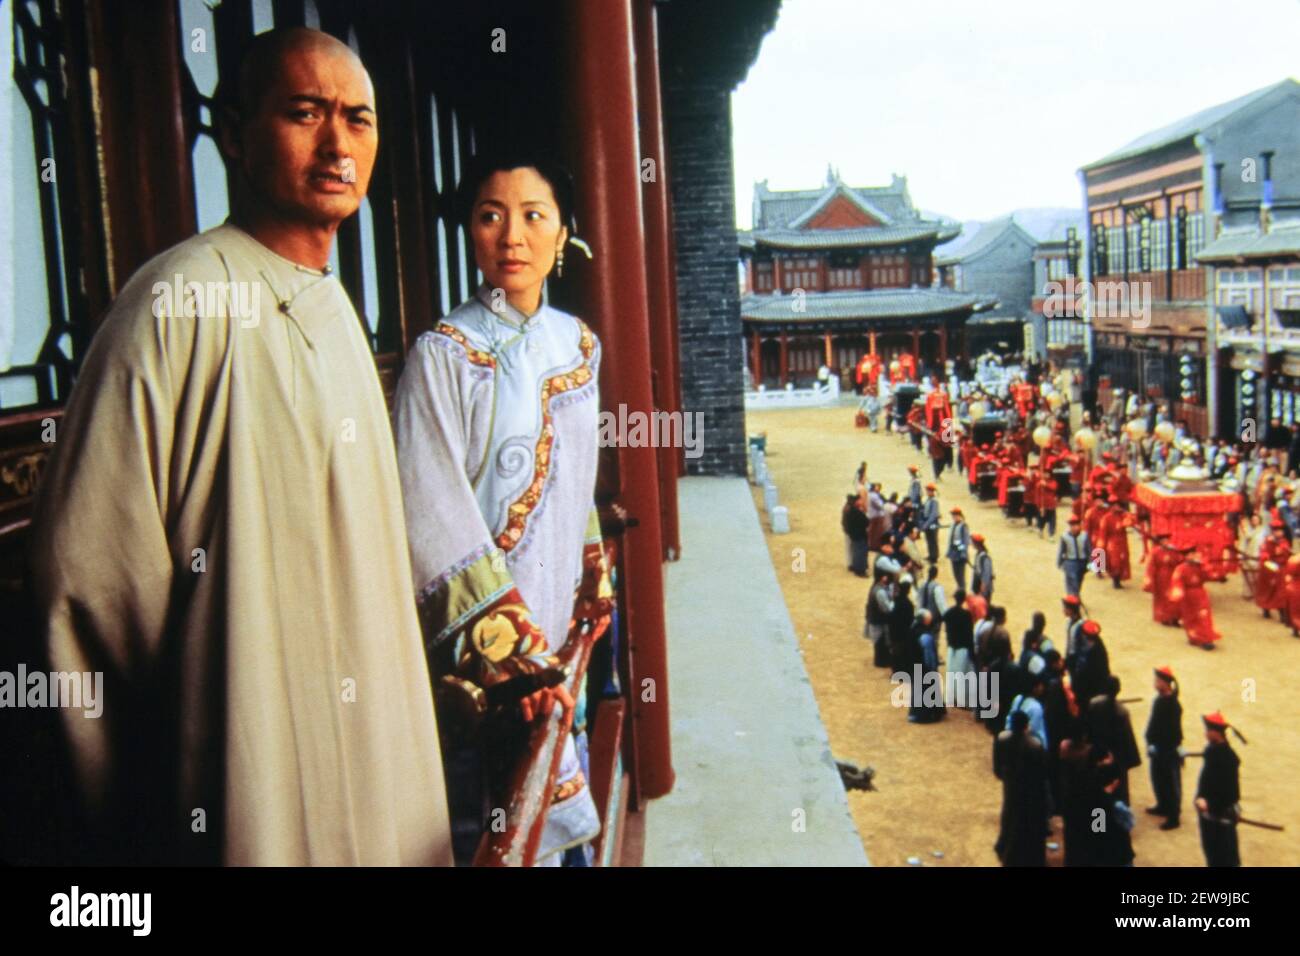 Chow Yun-Fat, Michelle Yeoh, 'Crouching Tiger, Hidden Dragon' (2000) Sony Pictures Classic . Photo Credit: / Sony Pictures Classic/The Hollywood Archive -  File Reference # 34082-621THA Stock Photo